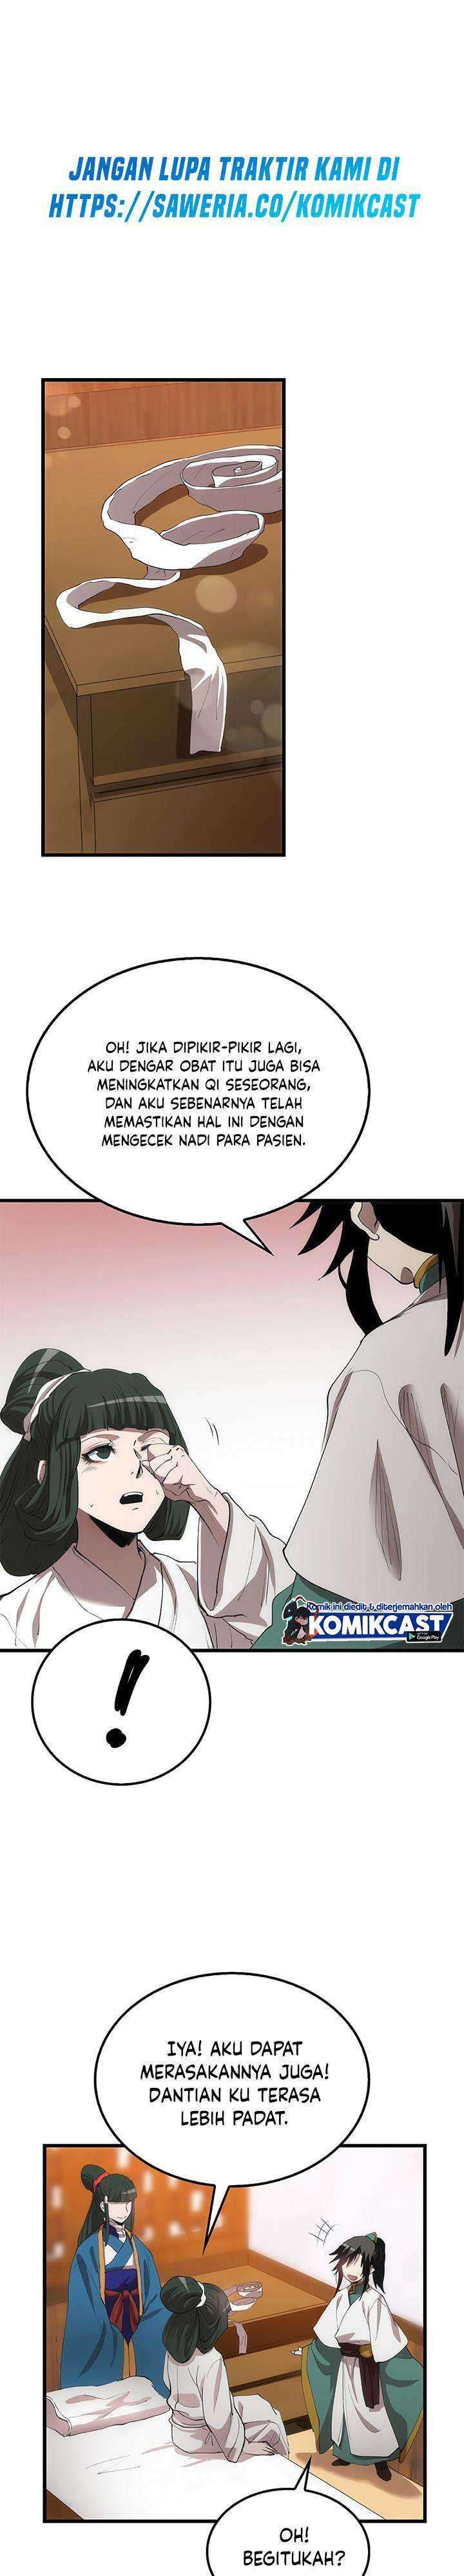 Doctor’s Rebirth Chapter 42